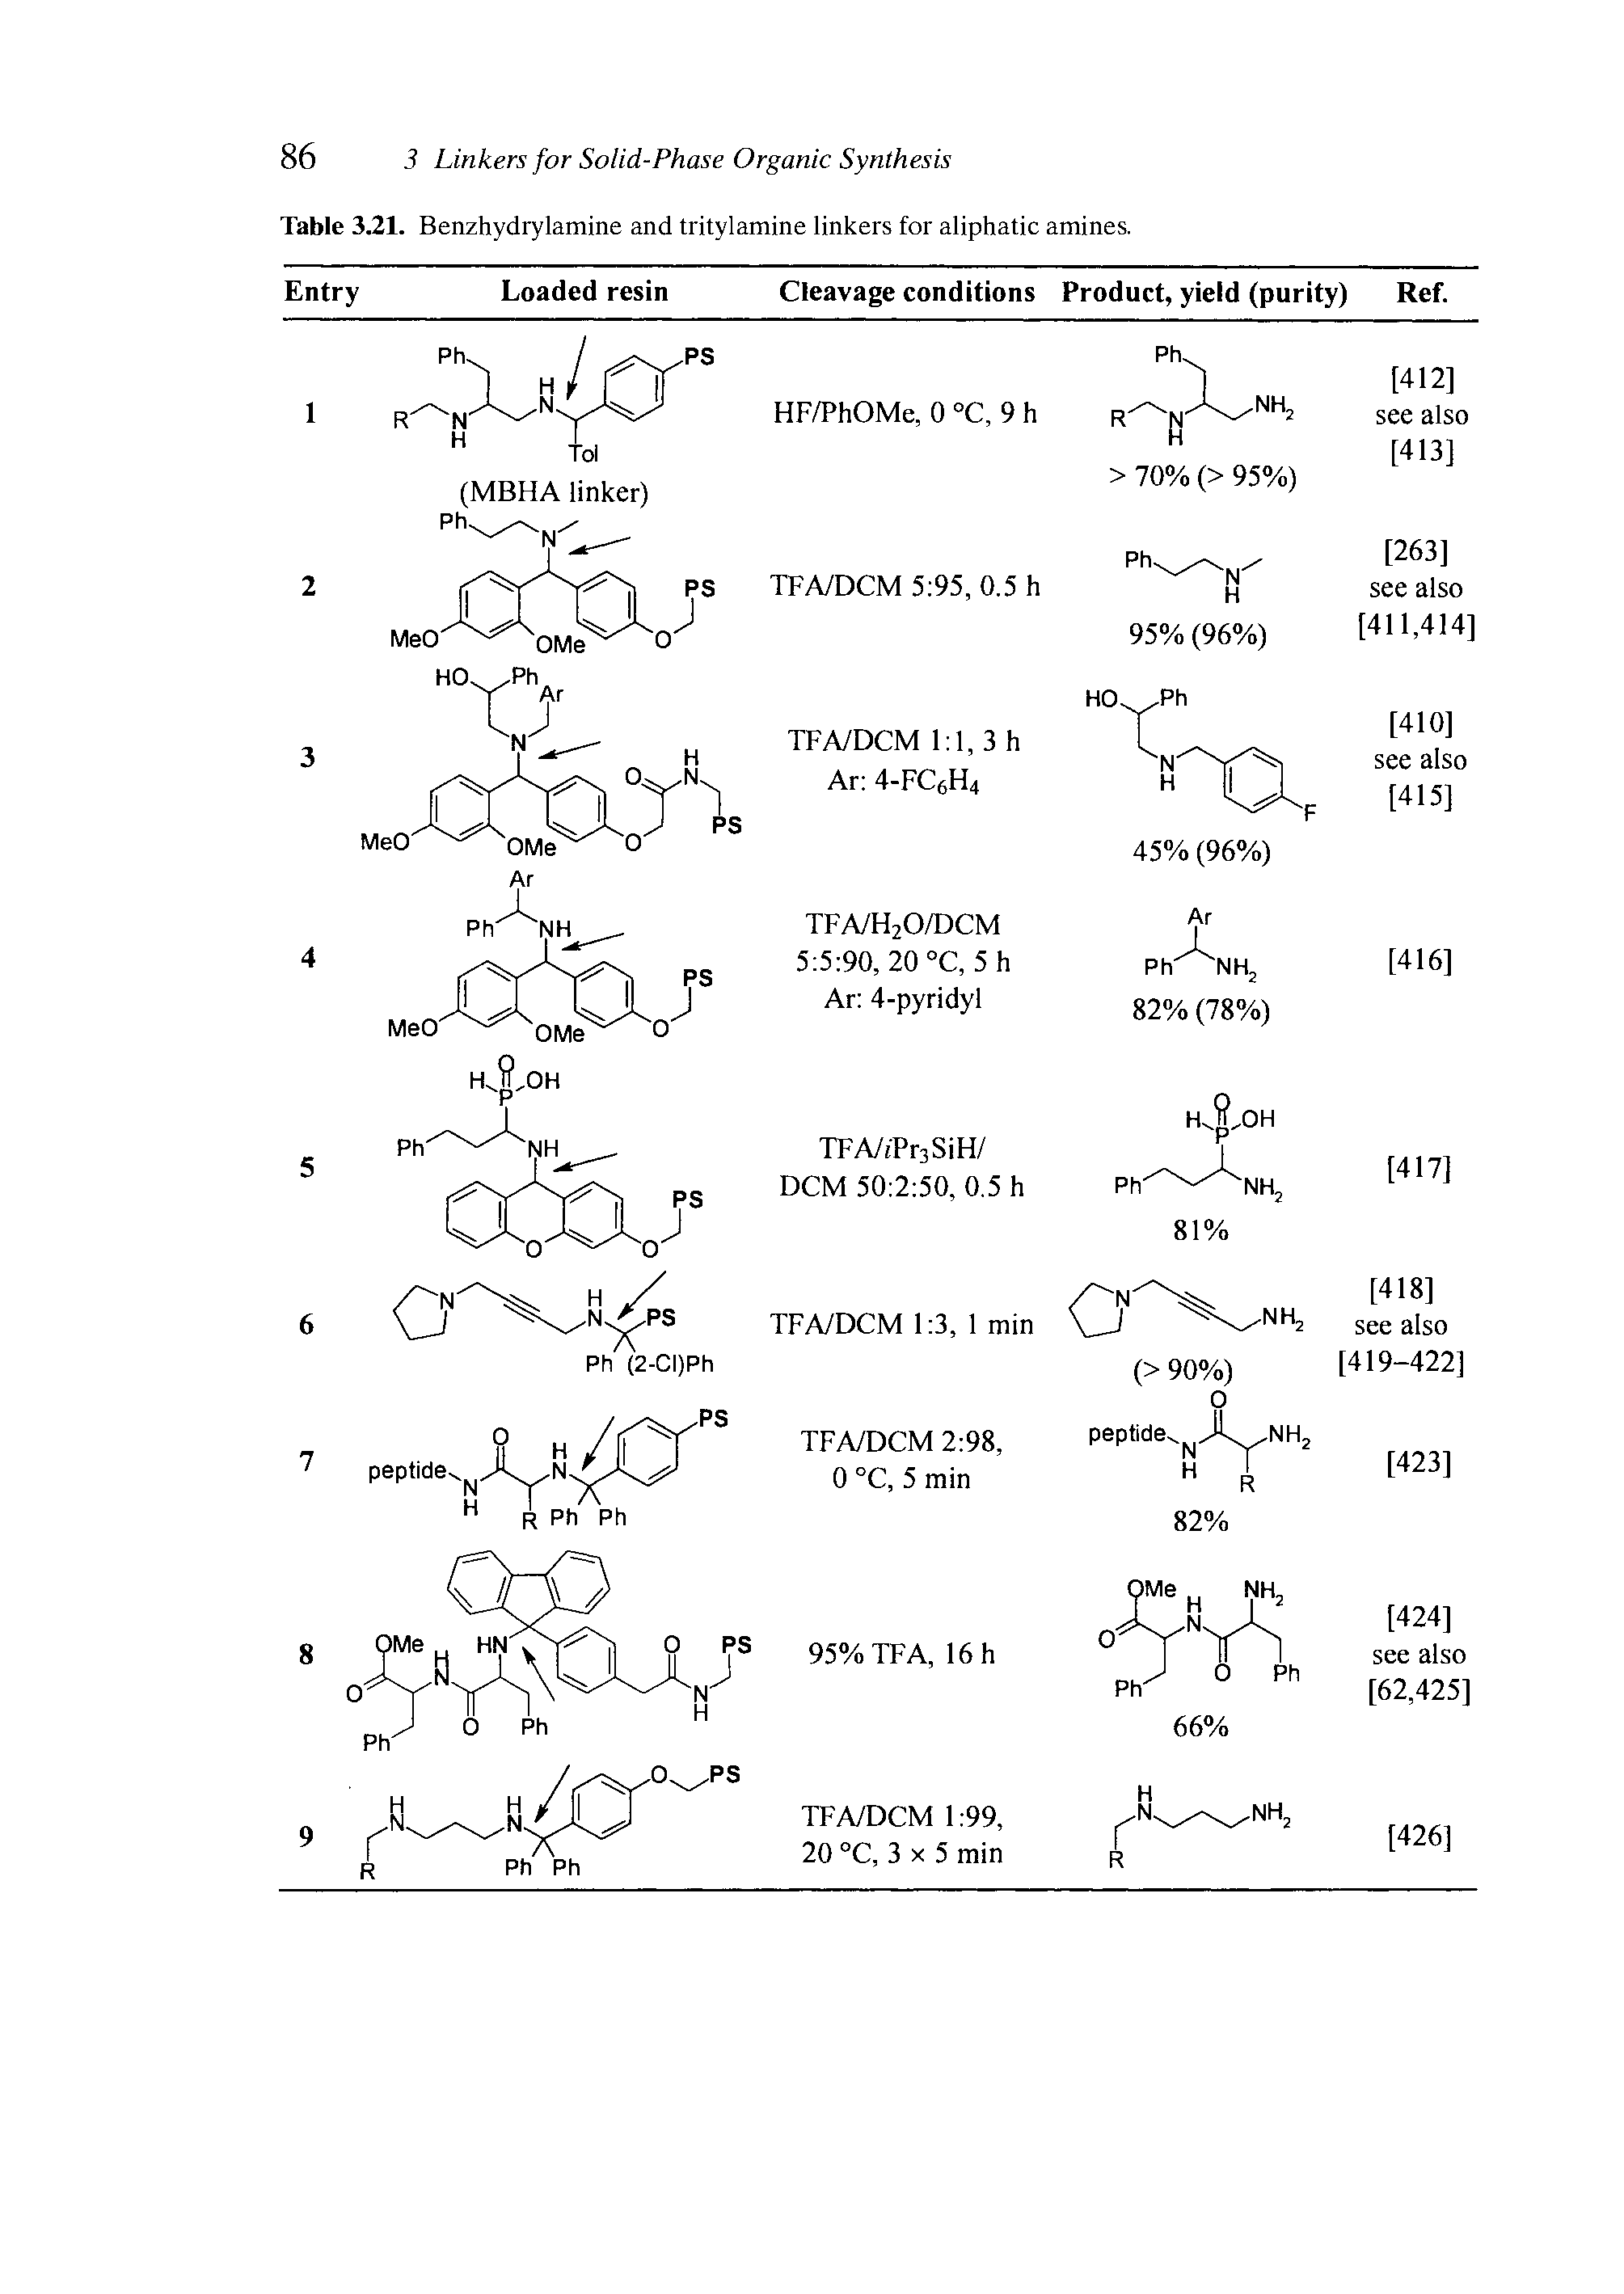 Table 3.21. Benzhydrylamine and tritylamine linkers for aliphatic amines.